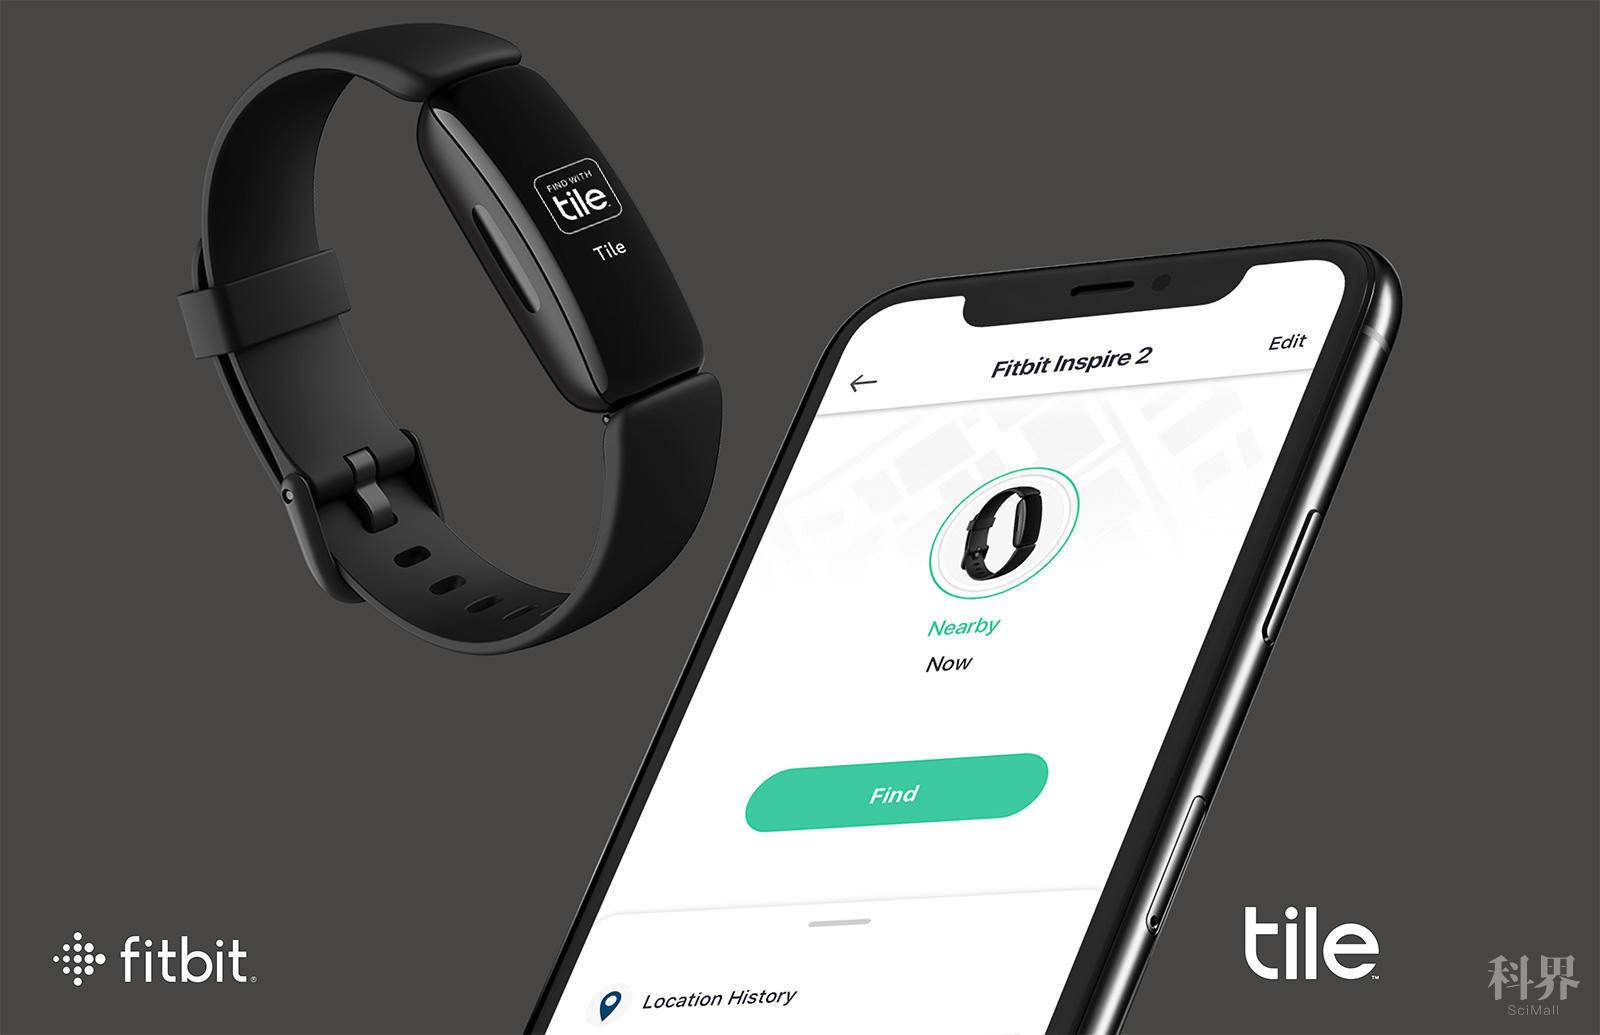 Fitbit Inspire 2 with Tile